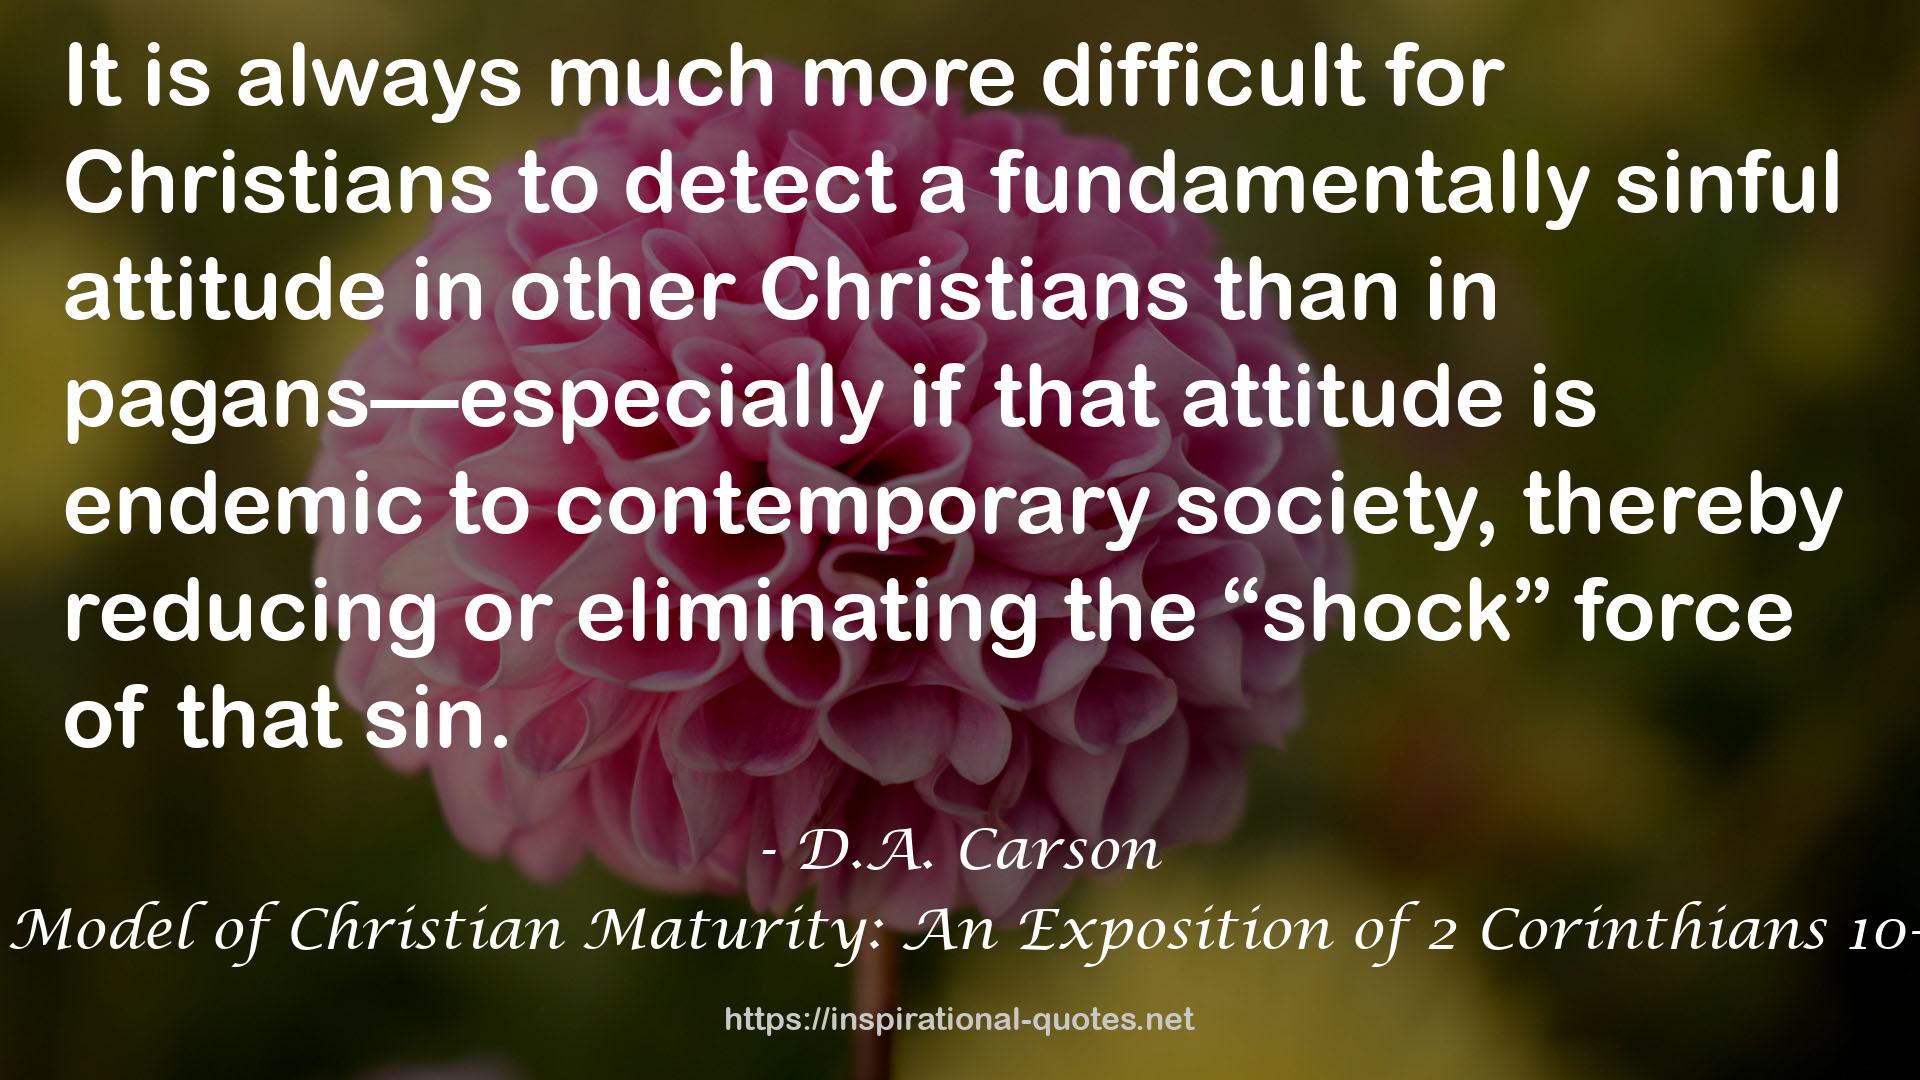 A Model of Christian Maturity: An Exposition of 2 Corinthians 10–13 QUOTES